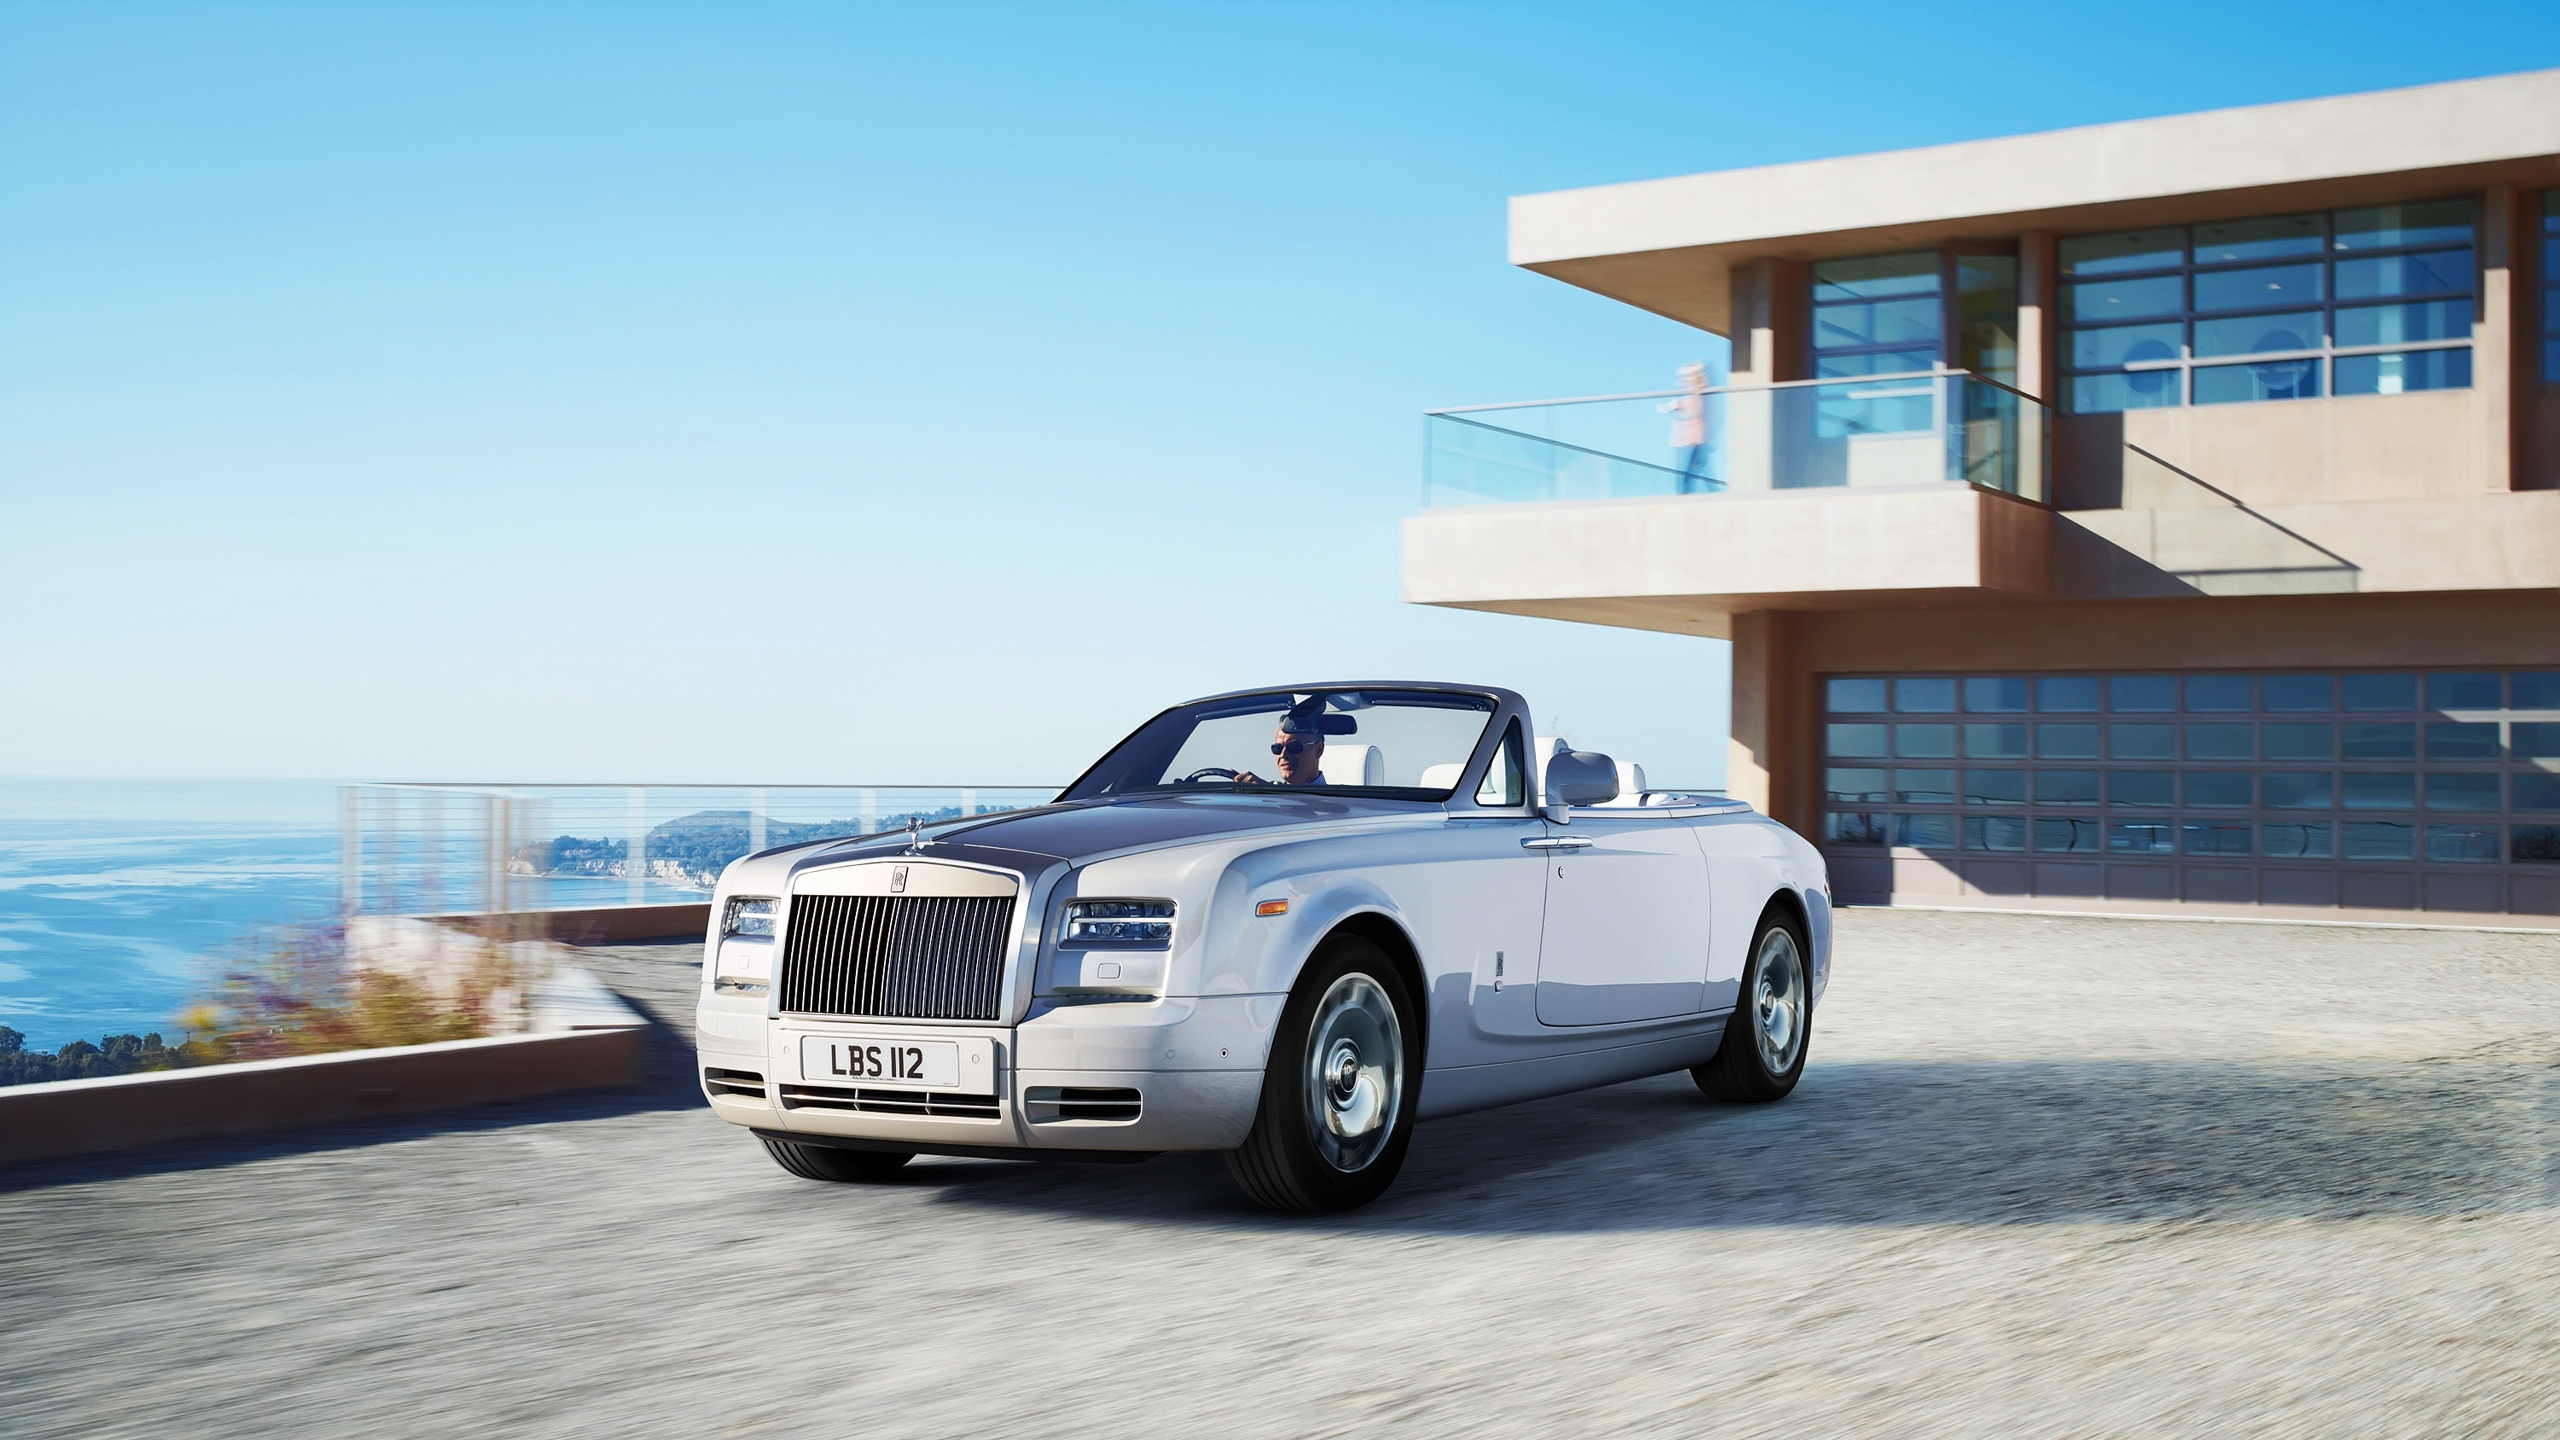 Beautiful Rolls Royce Coupe for 2560x1440 HDTV resolution